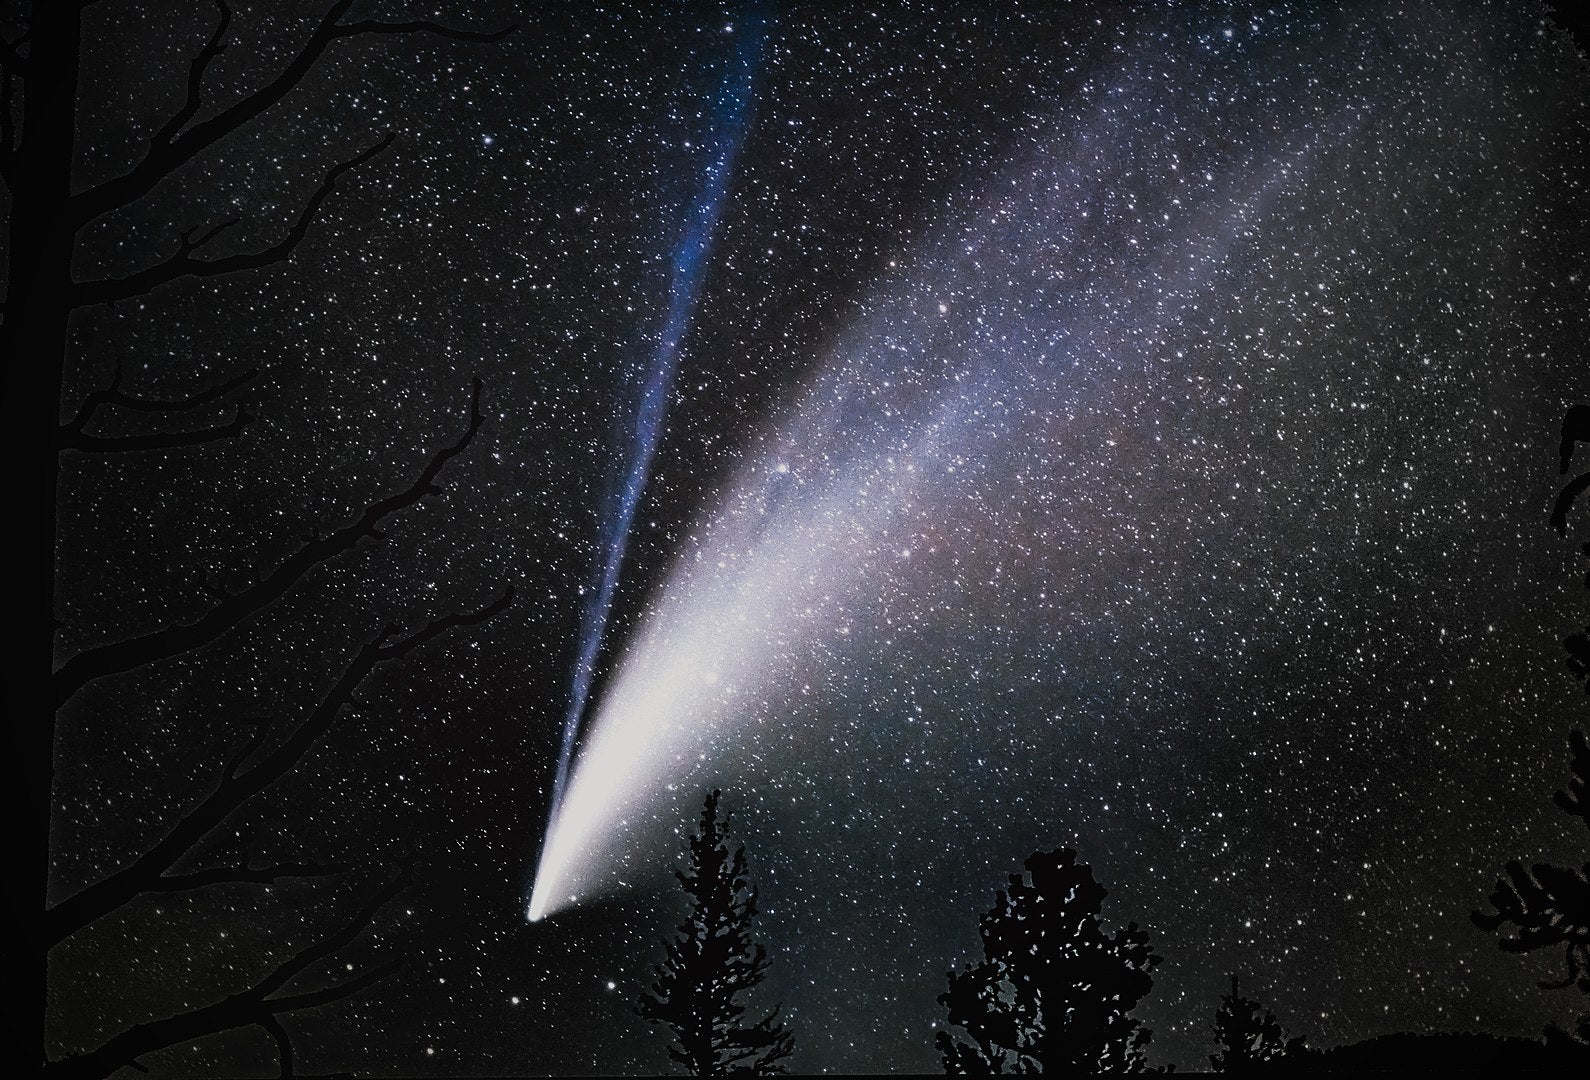 The break-up of a giant comet may produce fireballs – and killer space rocks